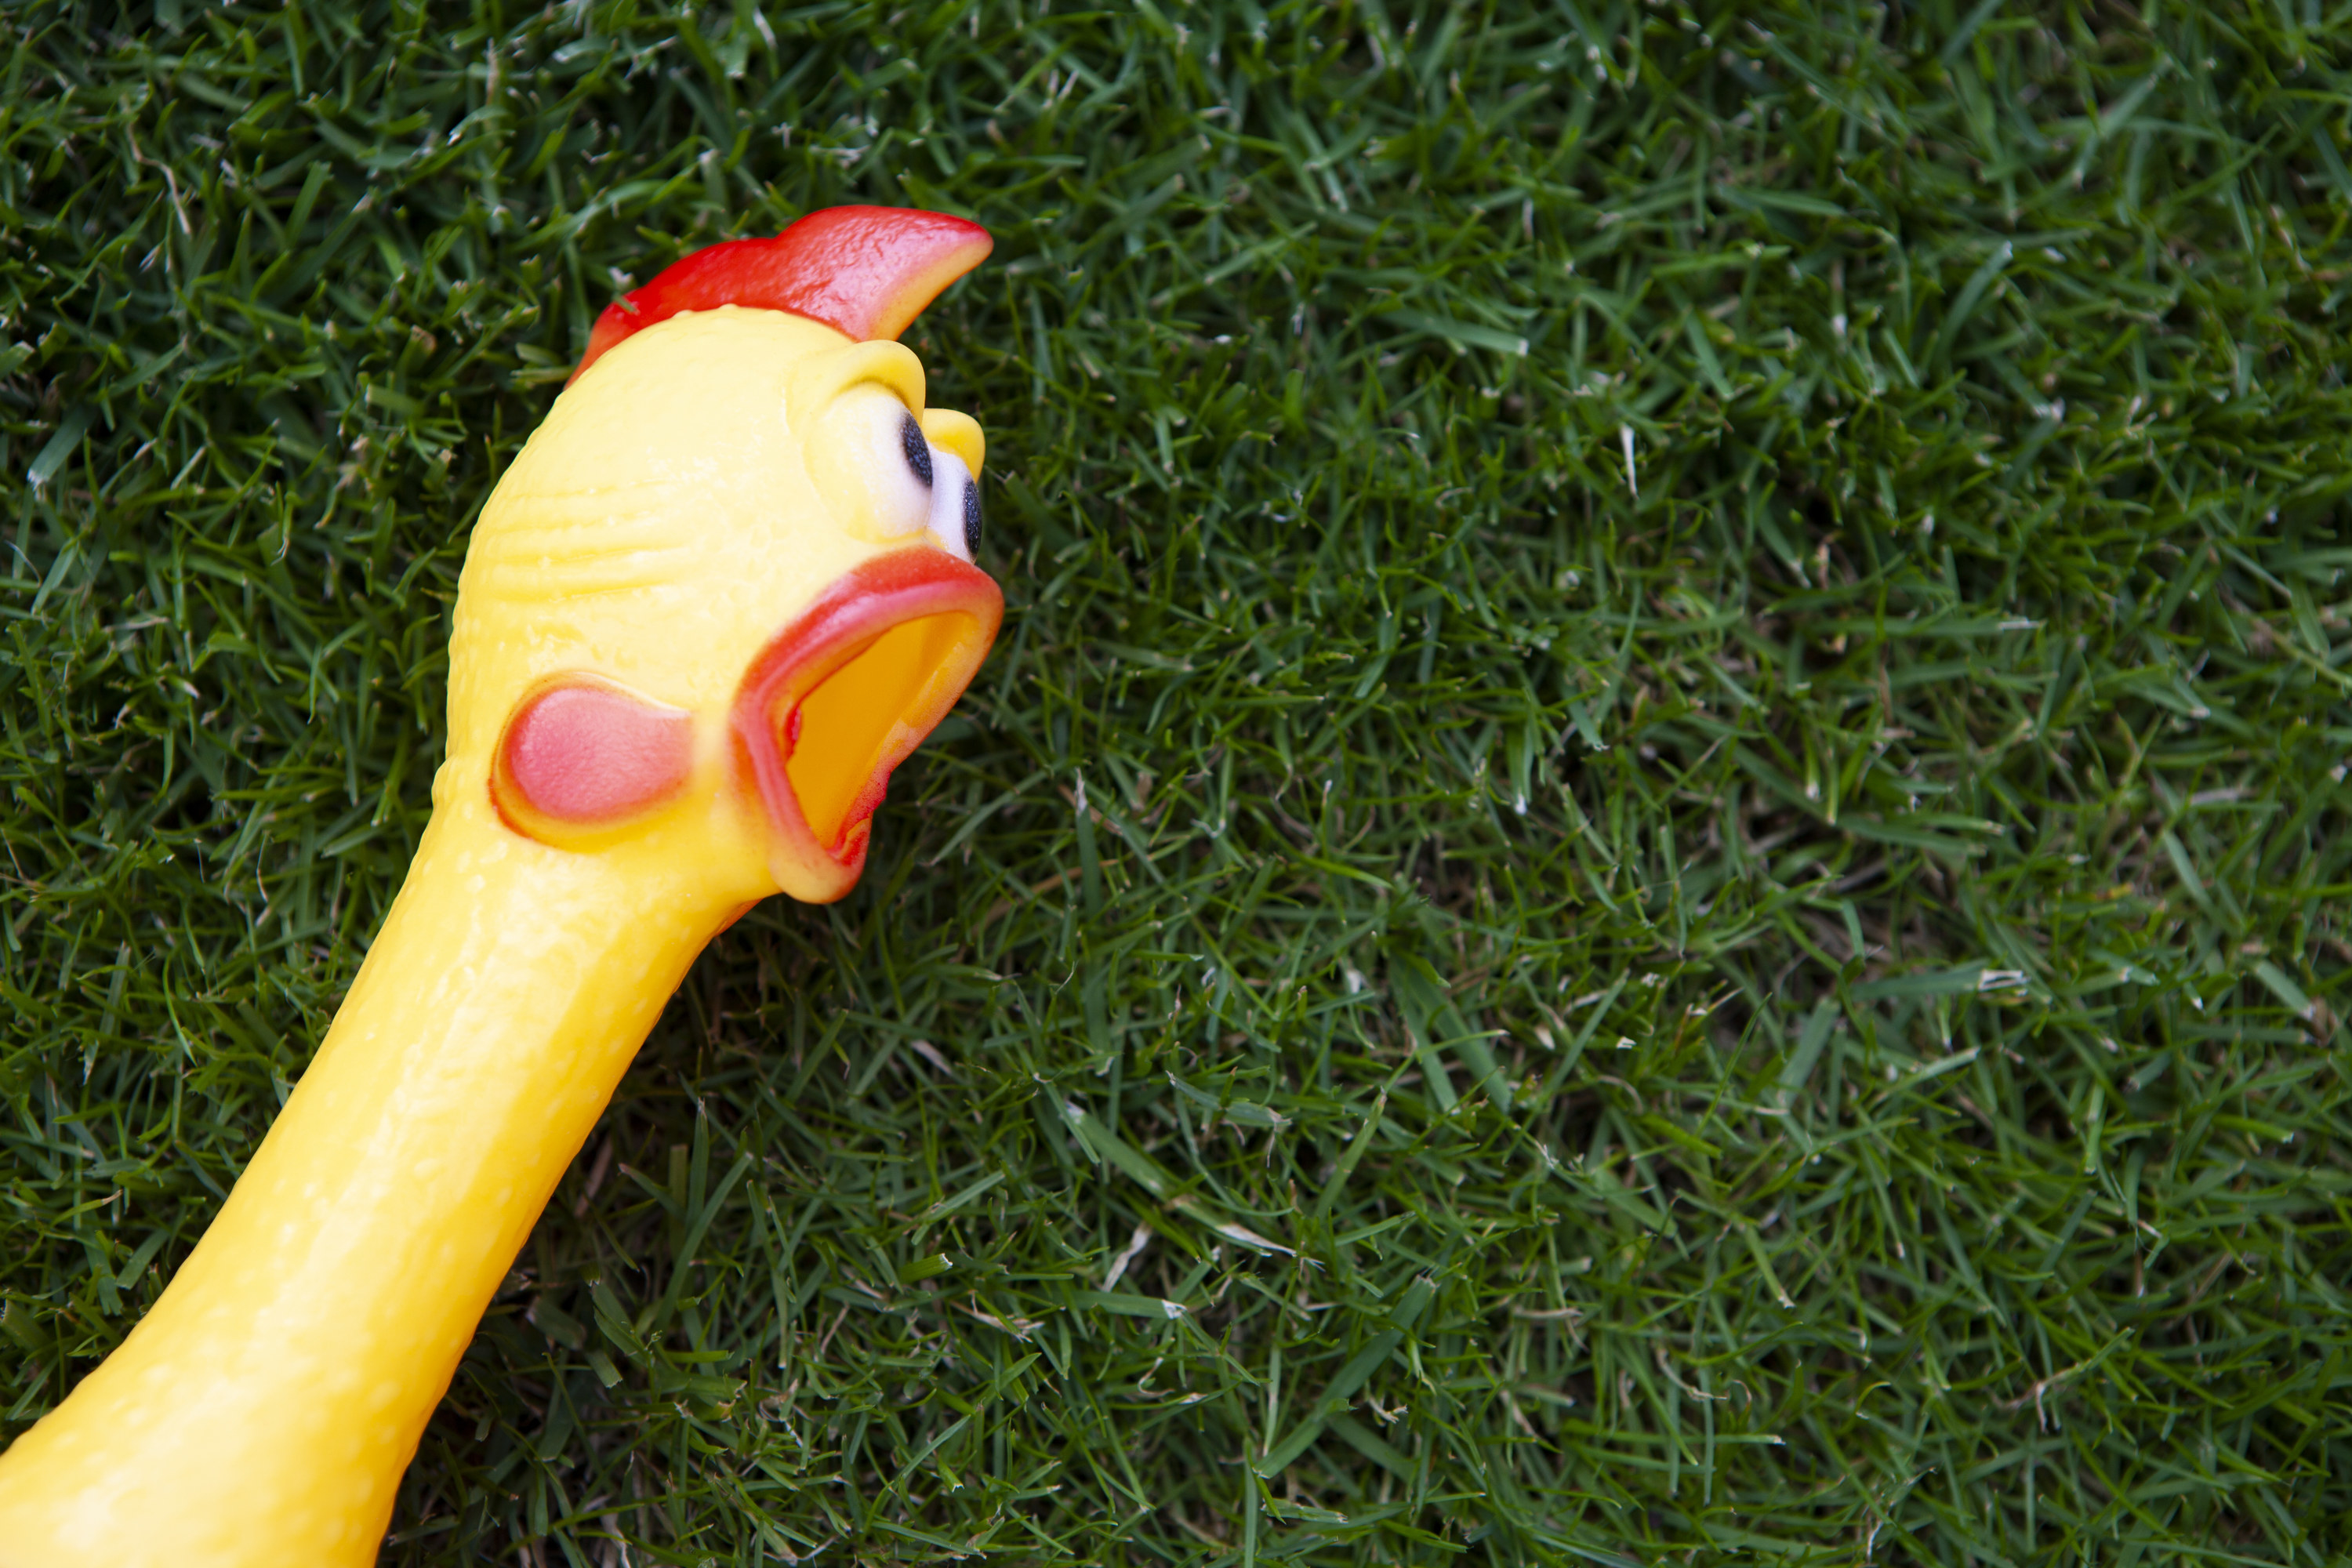 Rubber chicken laying in the grass.